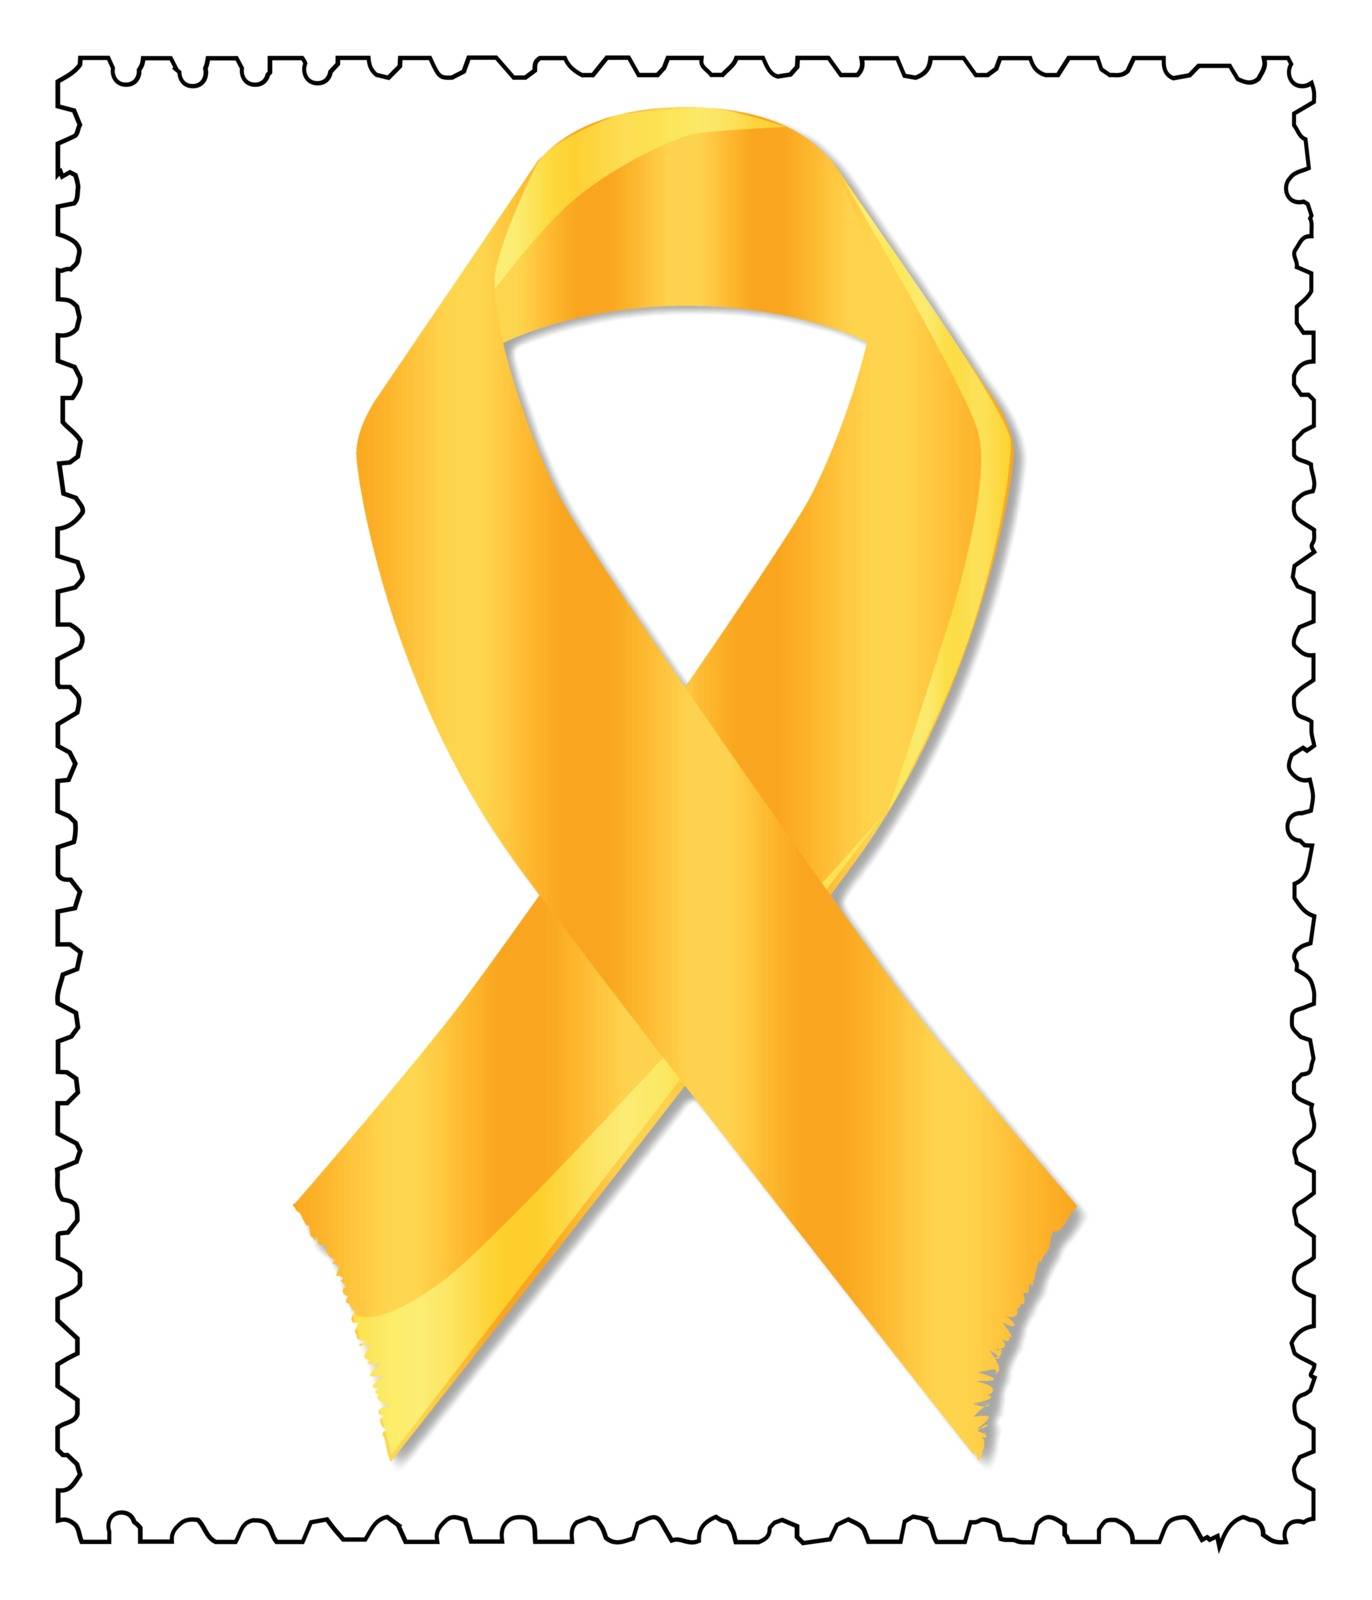 A gold childhood awareness ribbon on a postage stamp isolated on a white background